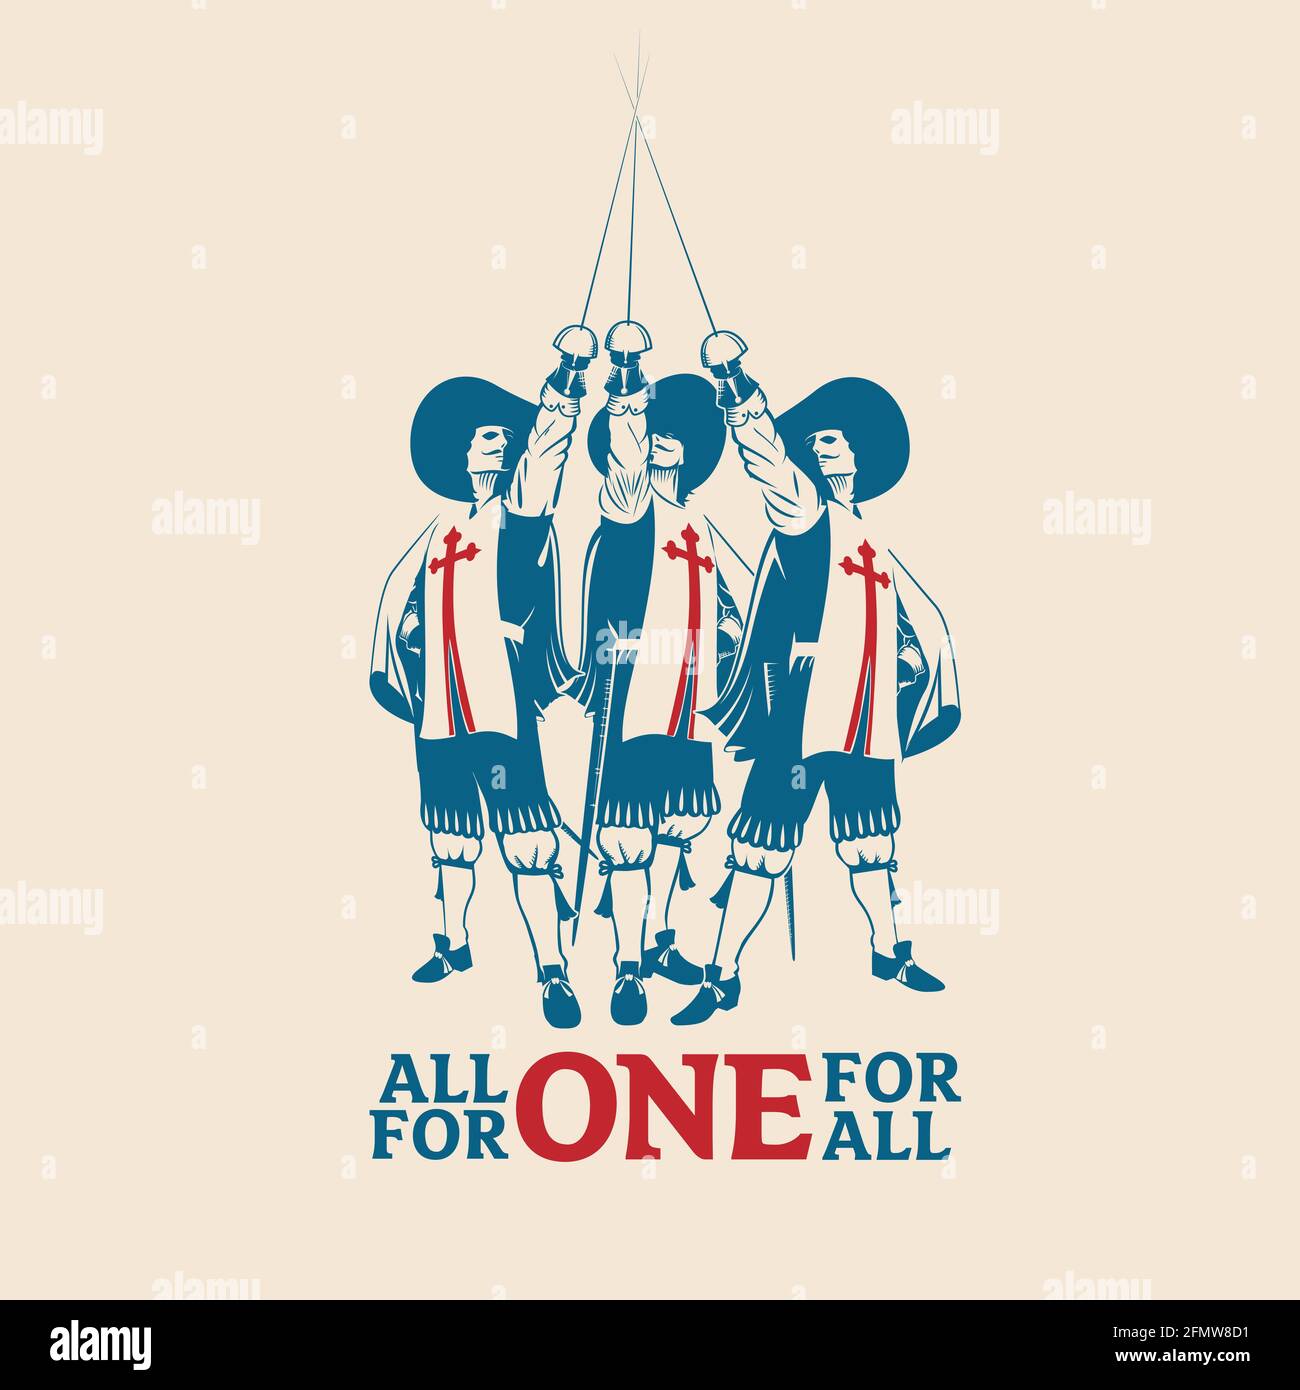 All For One For All vector illustration for commercial use such as logo, tshirt graphic, etc... Stock Vector